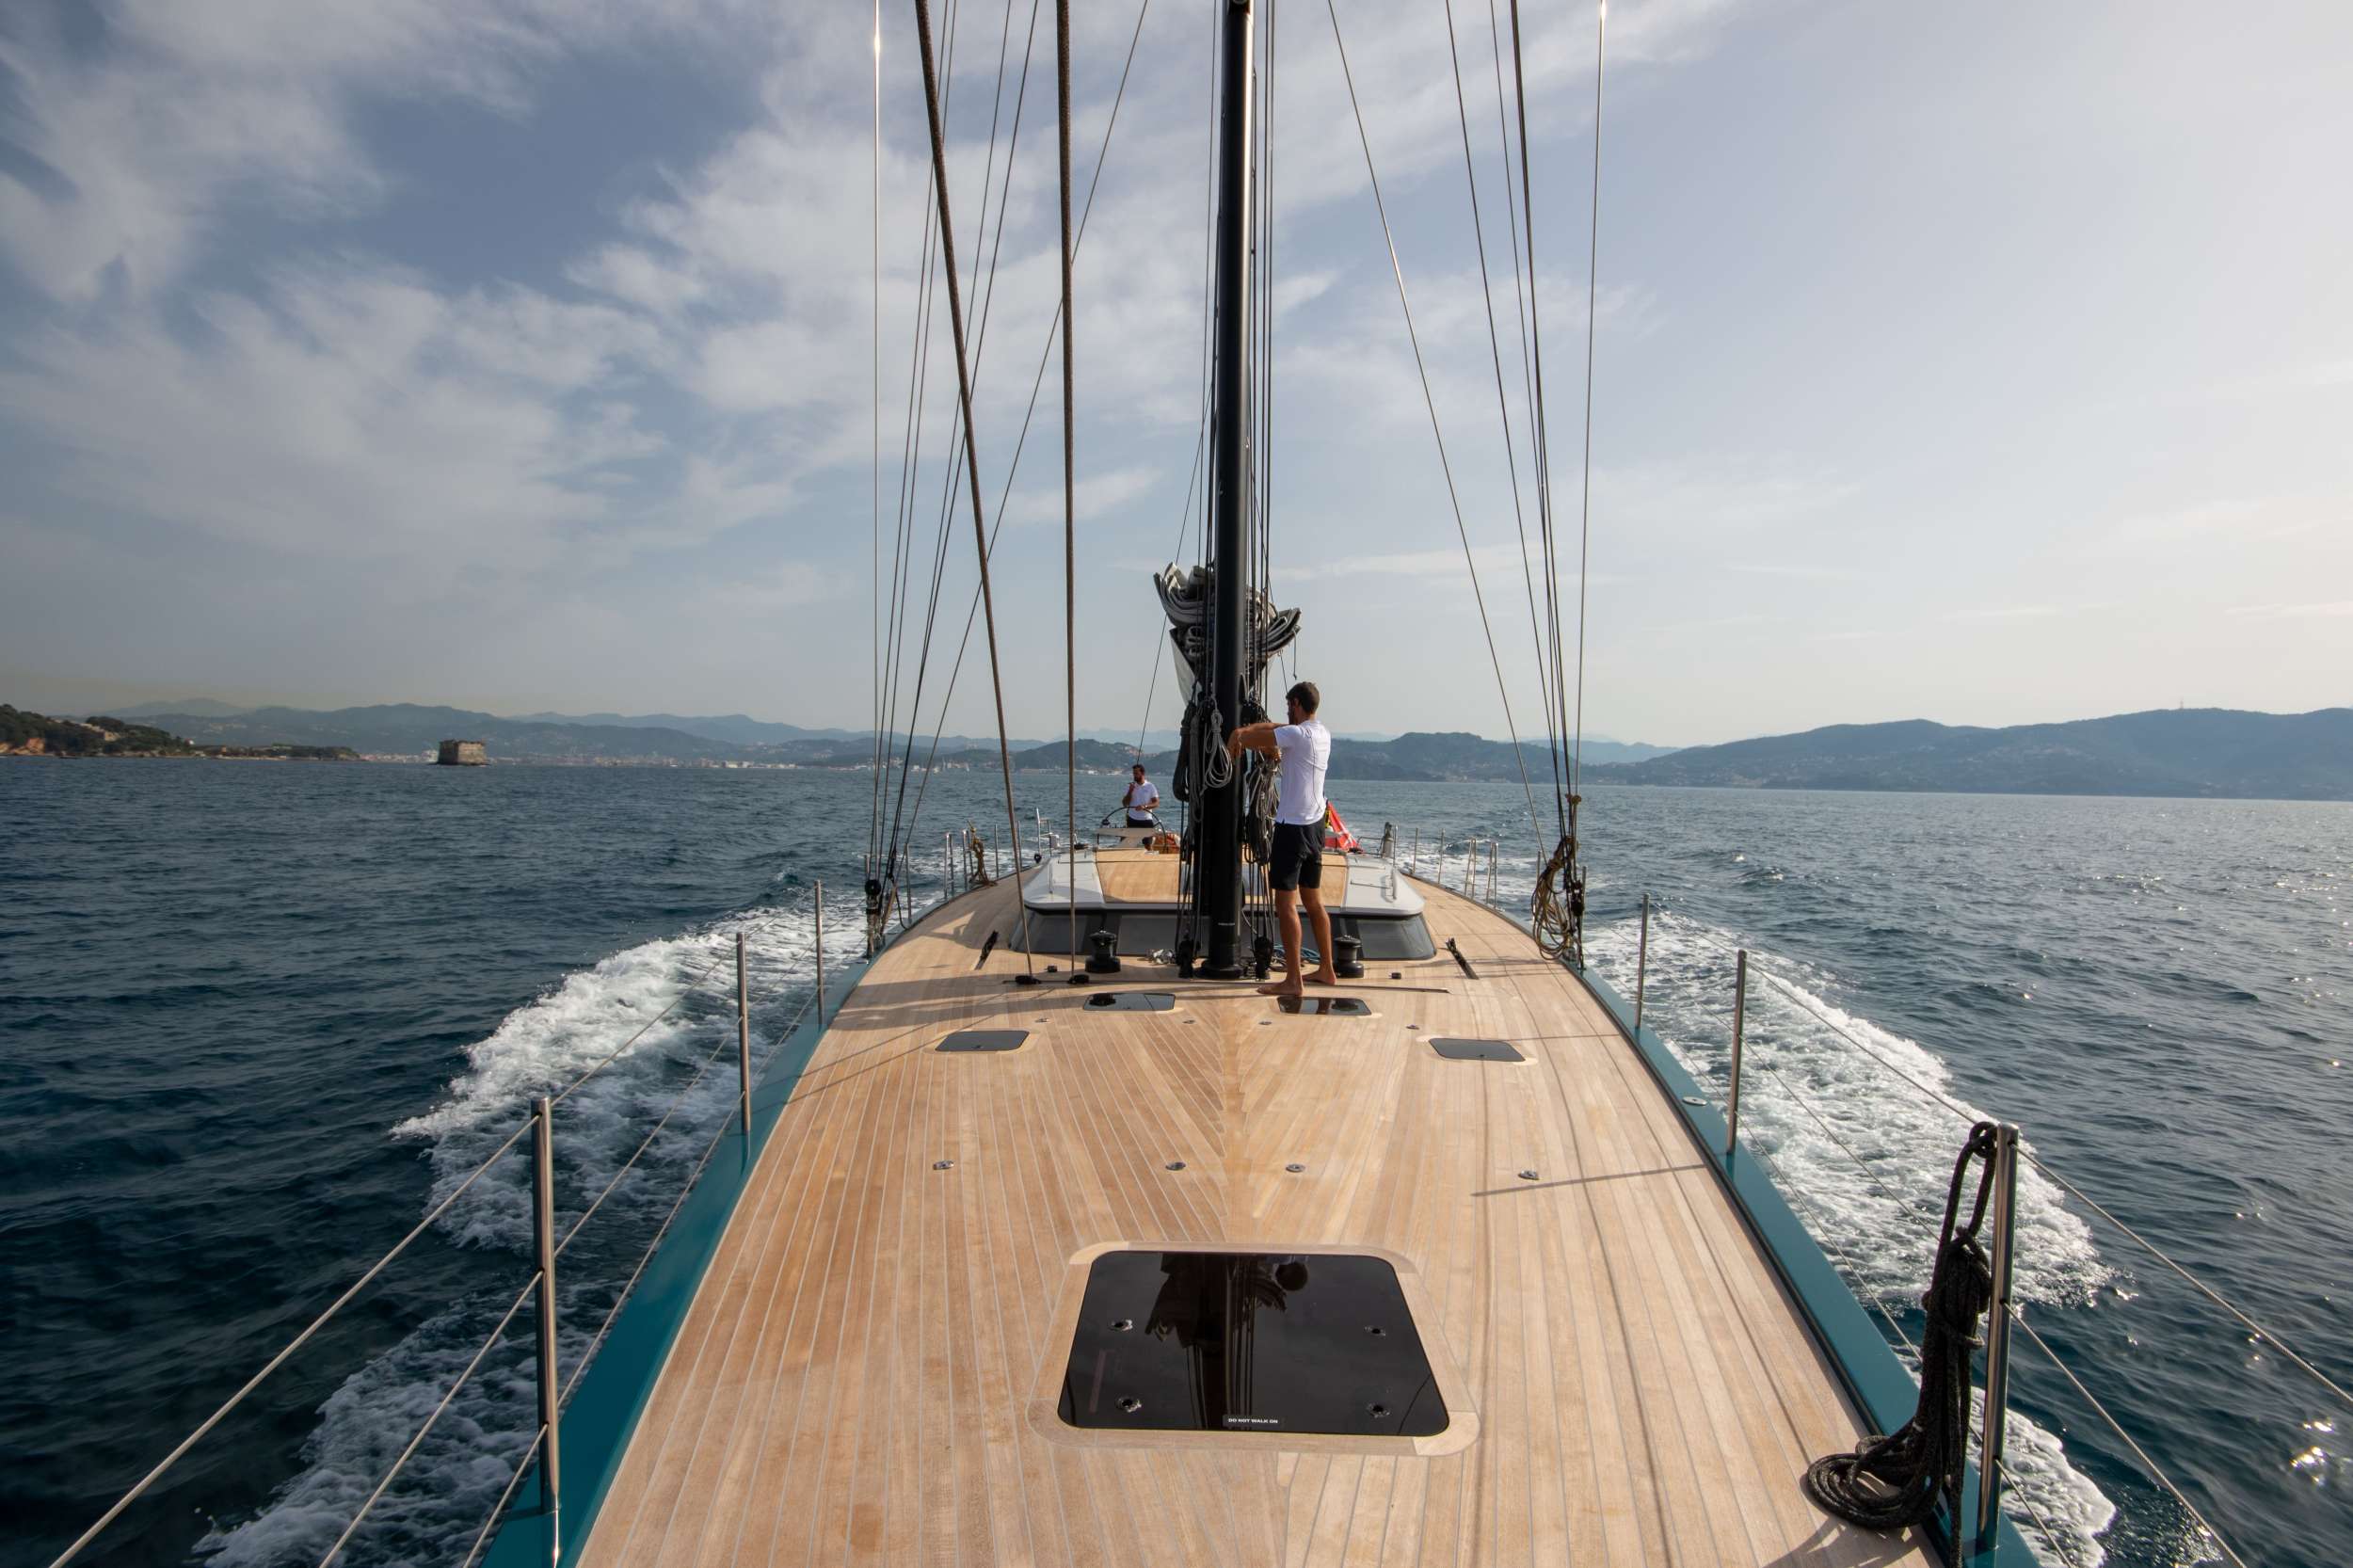 BIANCA - Sailboat Charter Montenegro & Boat hire in W. Med -Naples/Sicily, W. Med -Riviera/Cors/Sard., W. Med - Spain/Balearics 4